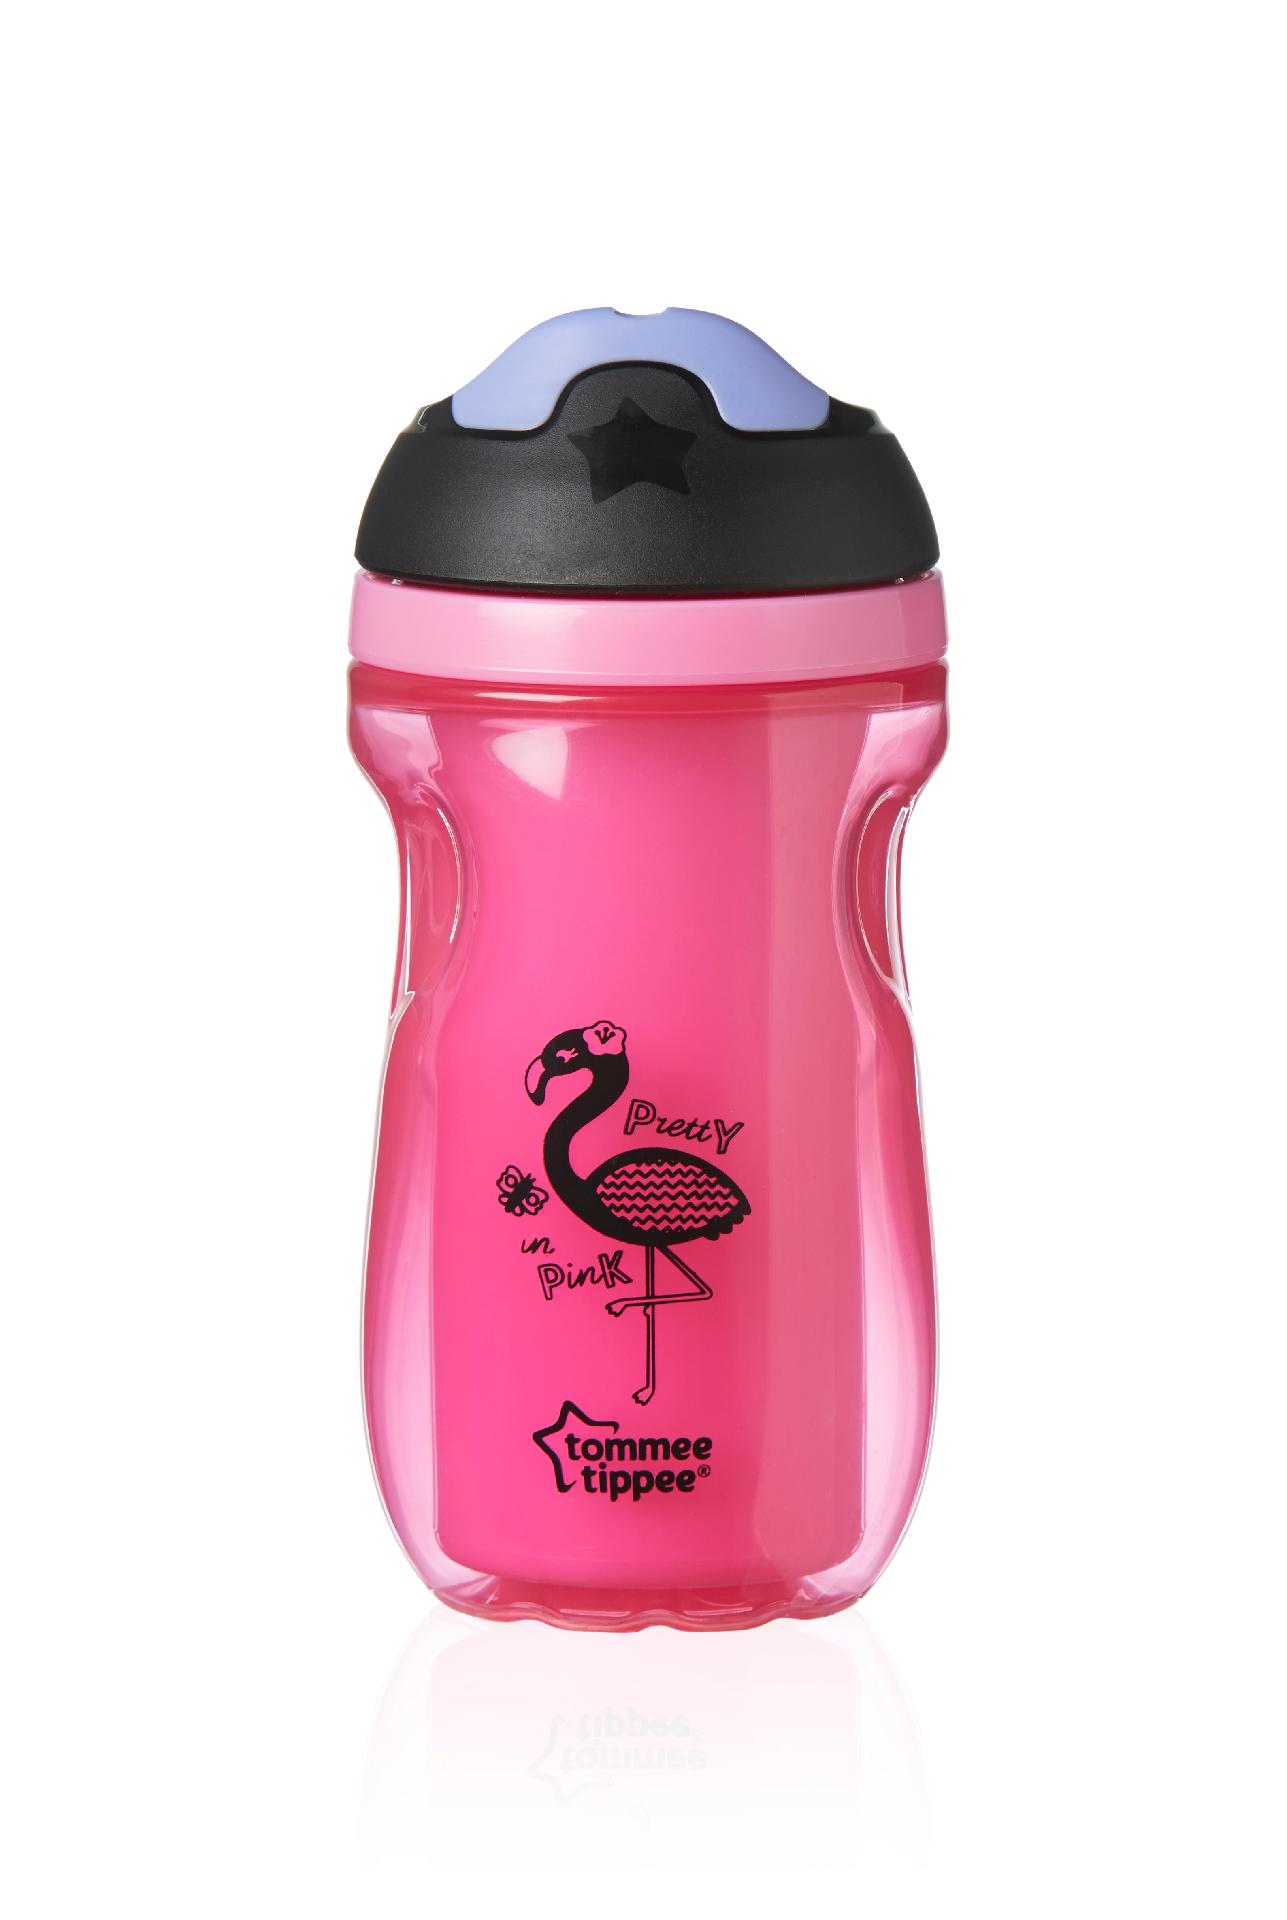 Cana Sipper Izoterma Explora, Tommee Tippee, 260ml, Siclam image 1